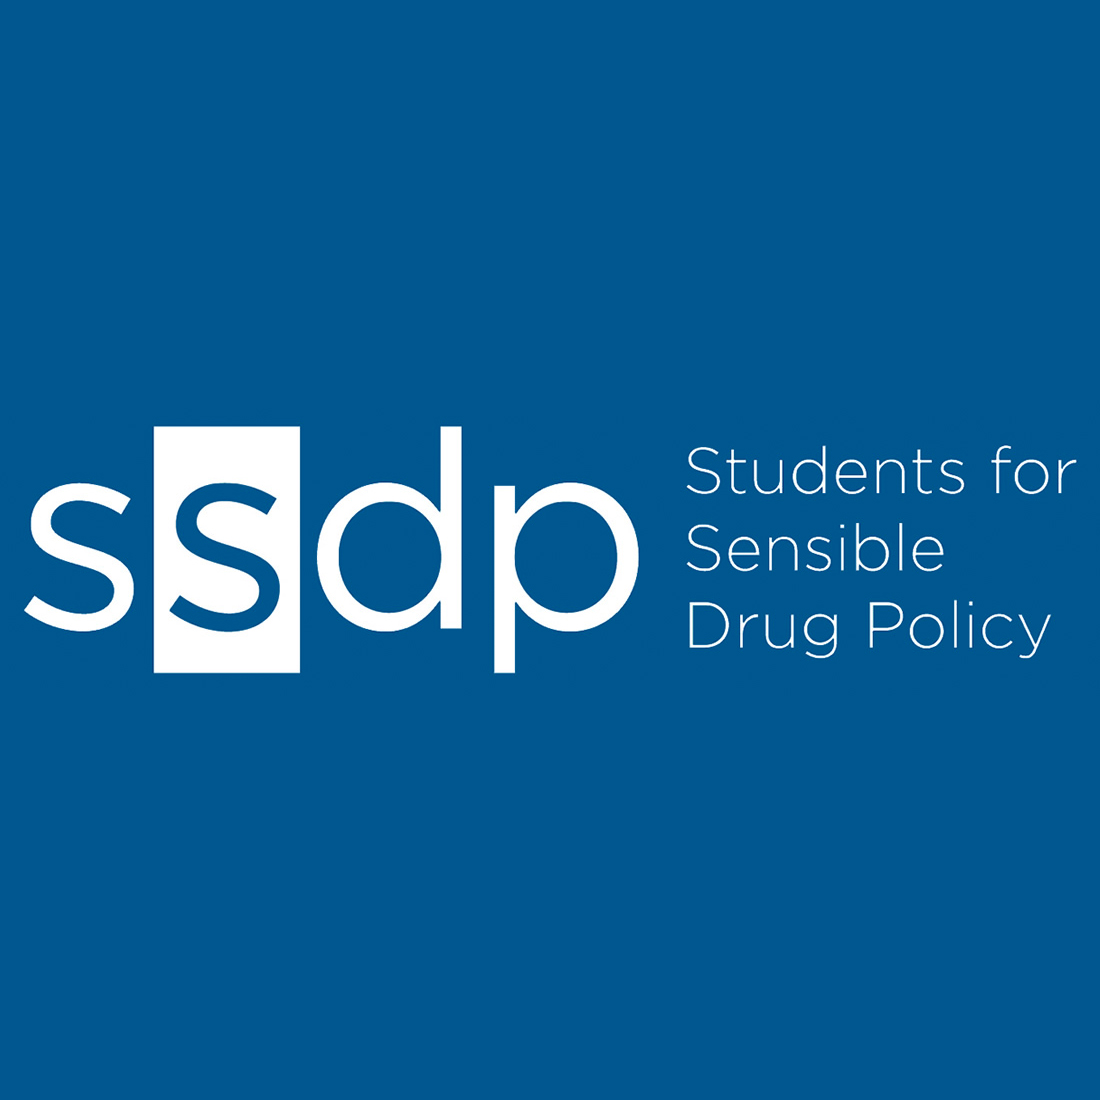 SSDP Students For Sensible Drug Policy